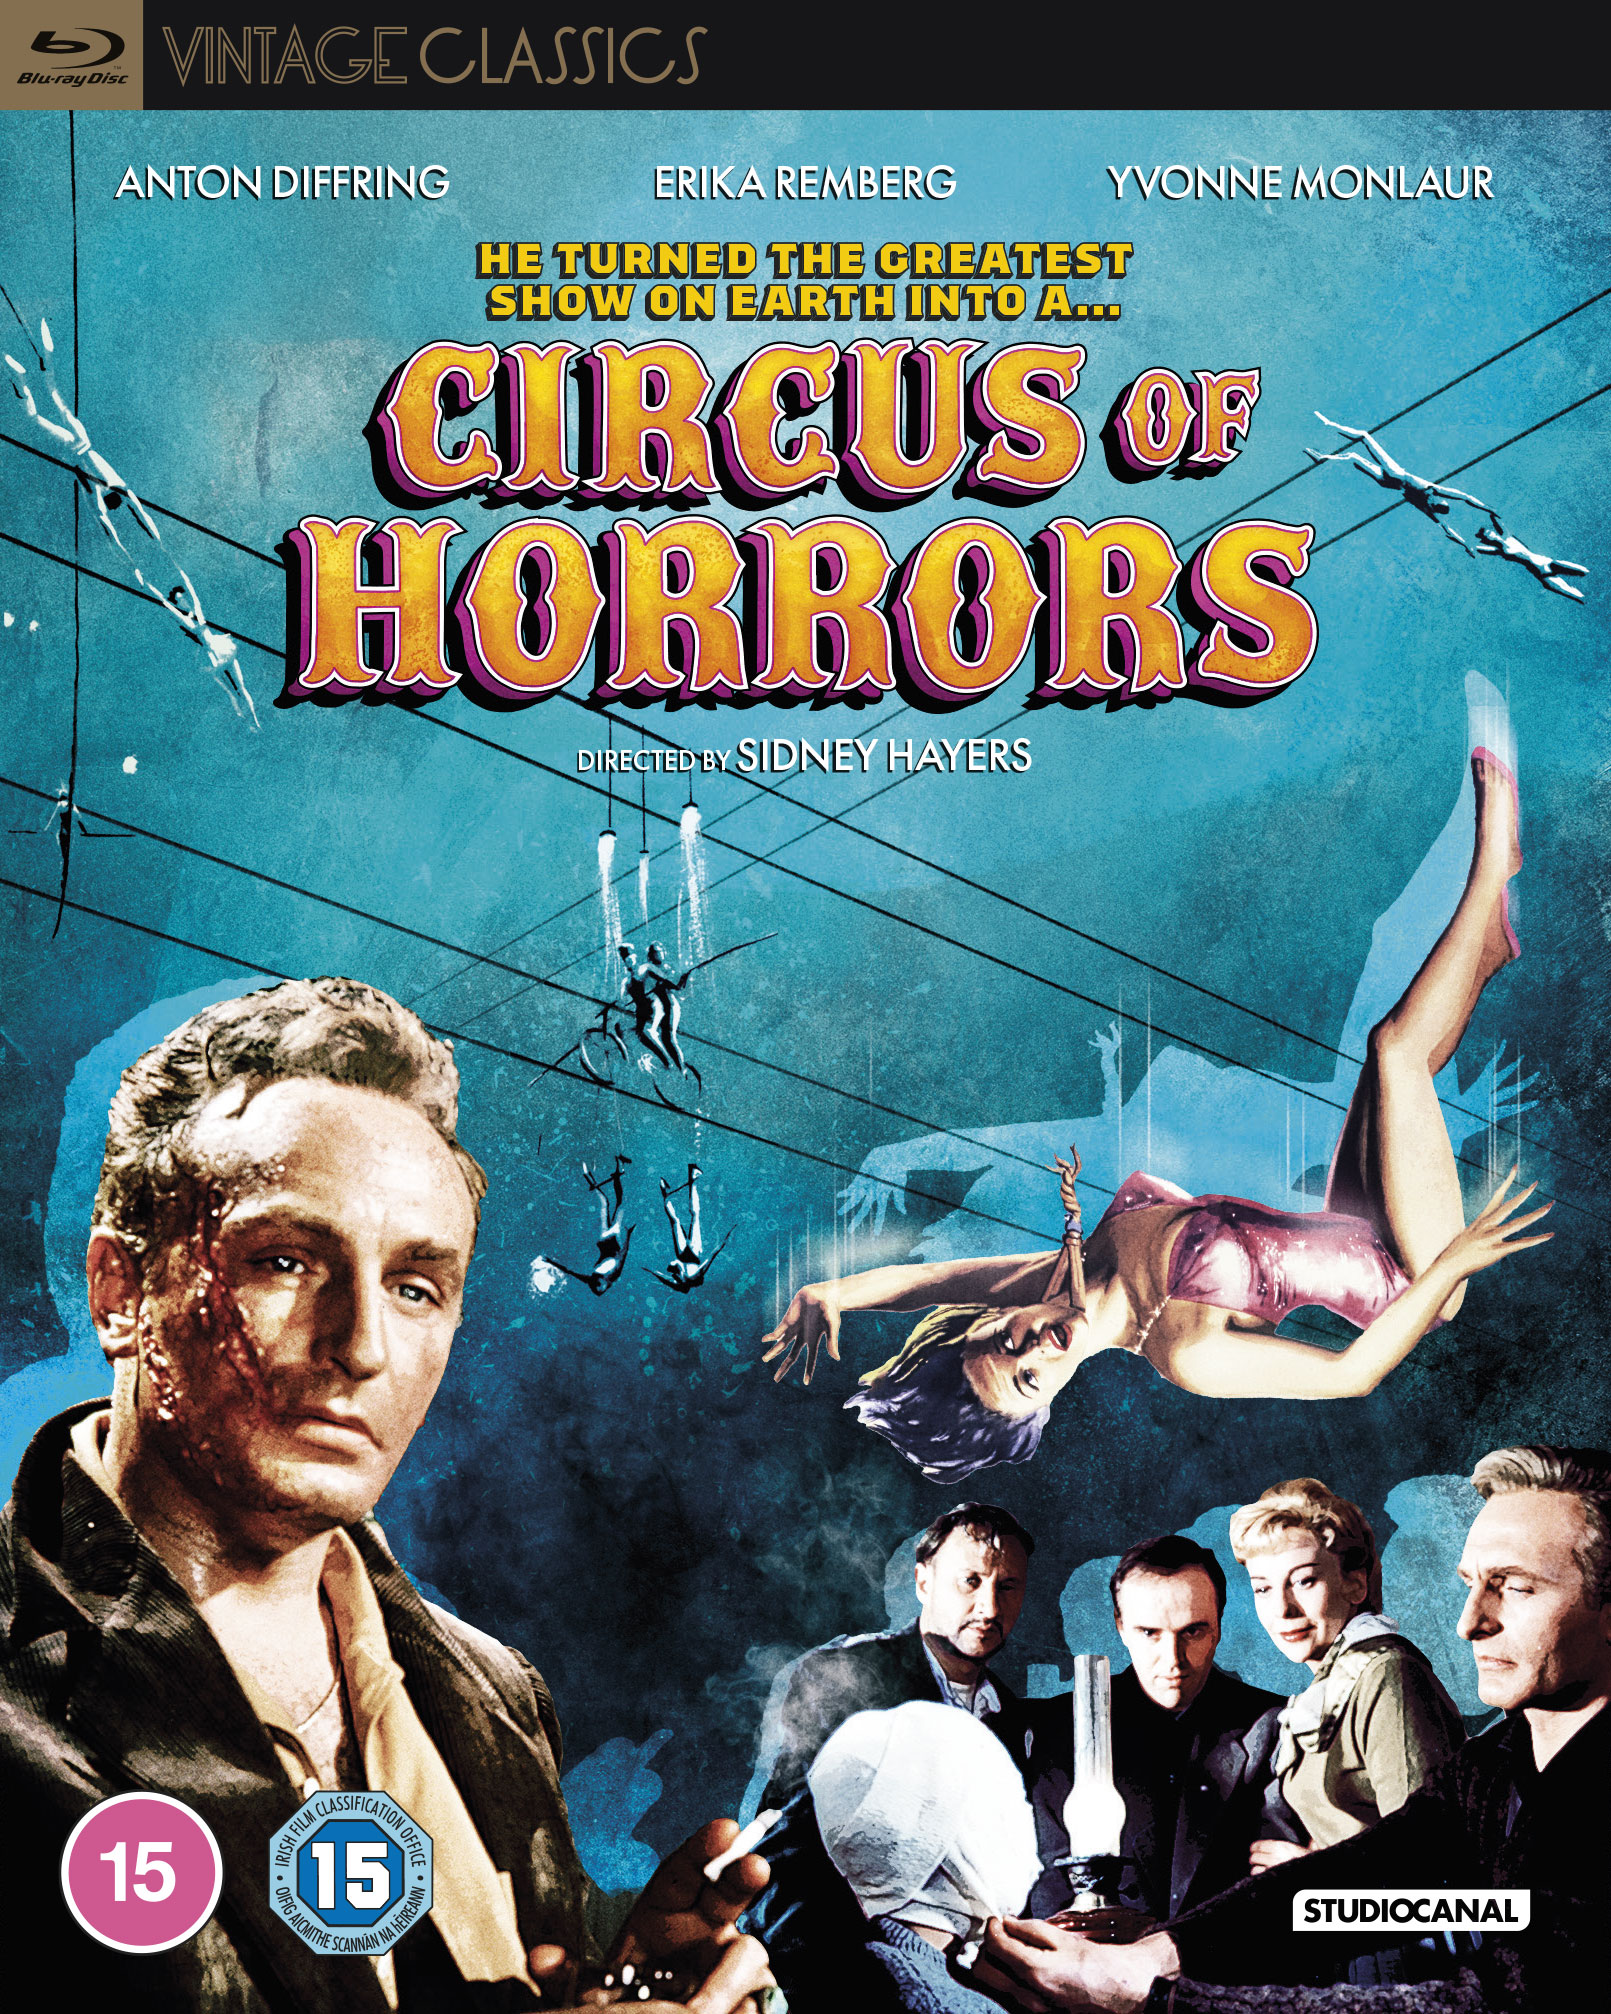 boom competitions -  win Circus of Horrors on Blu-ray